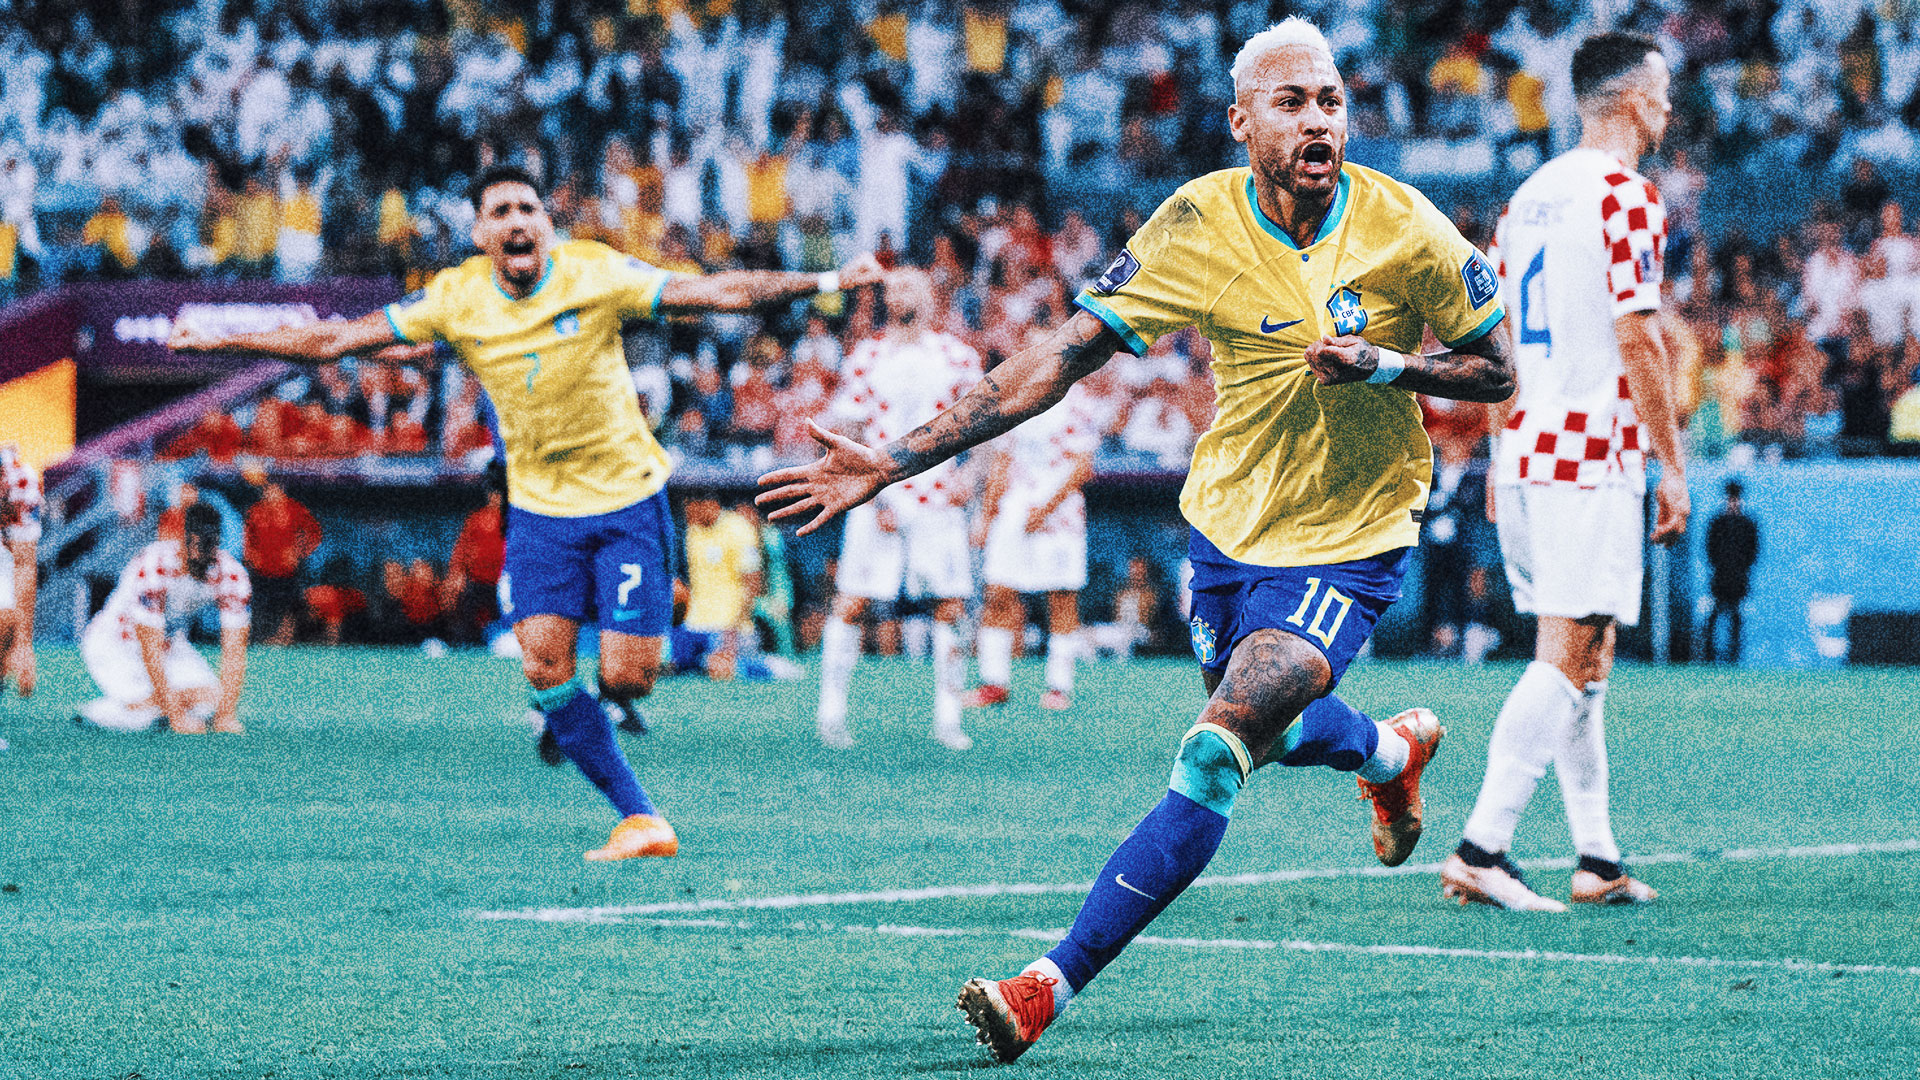 Neymar ties Pelé's all-time record for goals scored in Brazil's loss